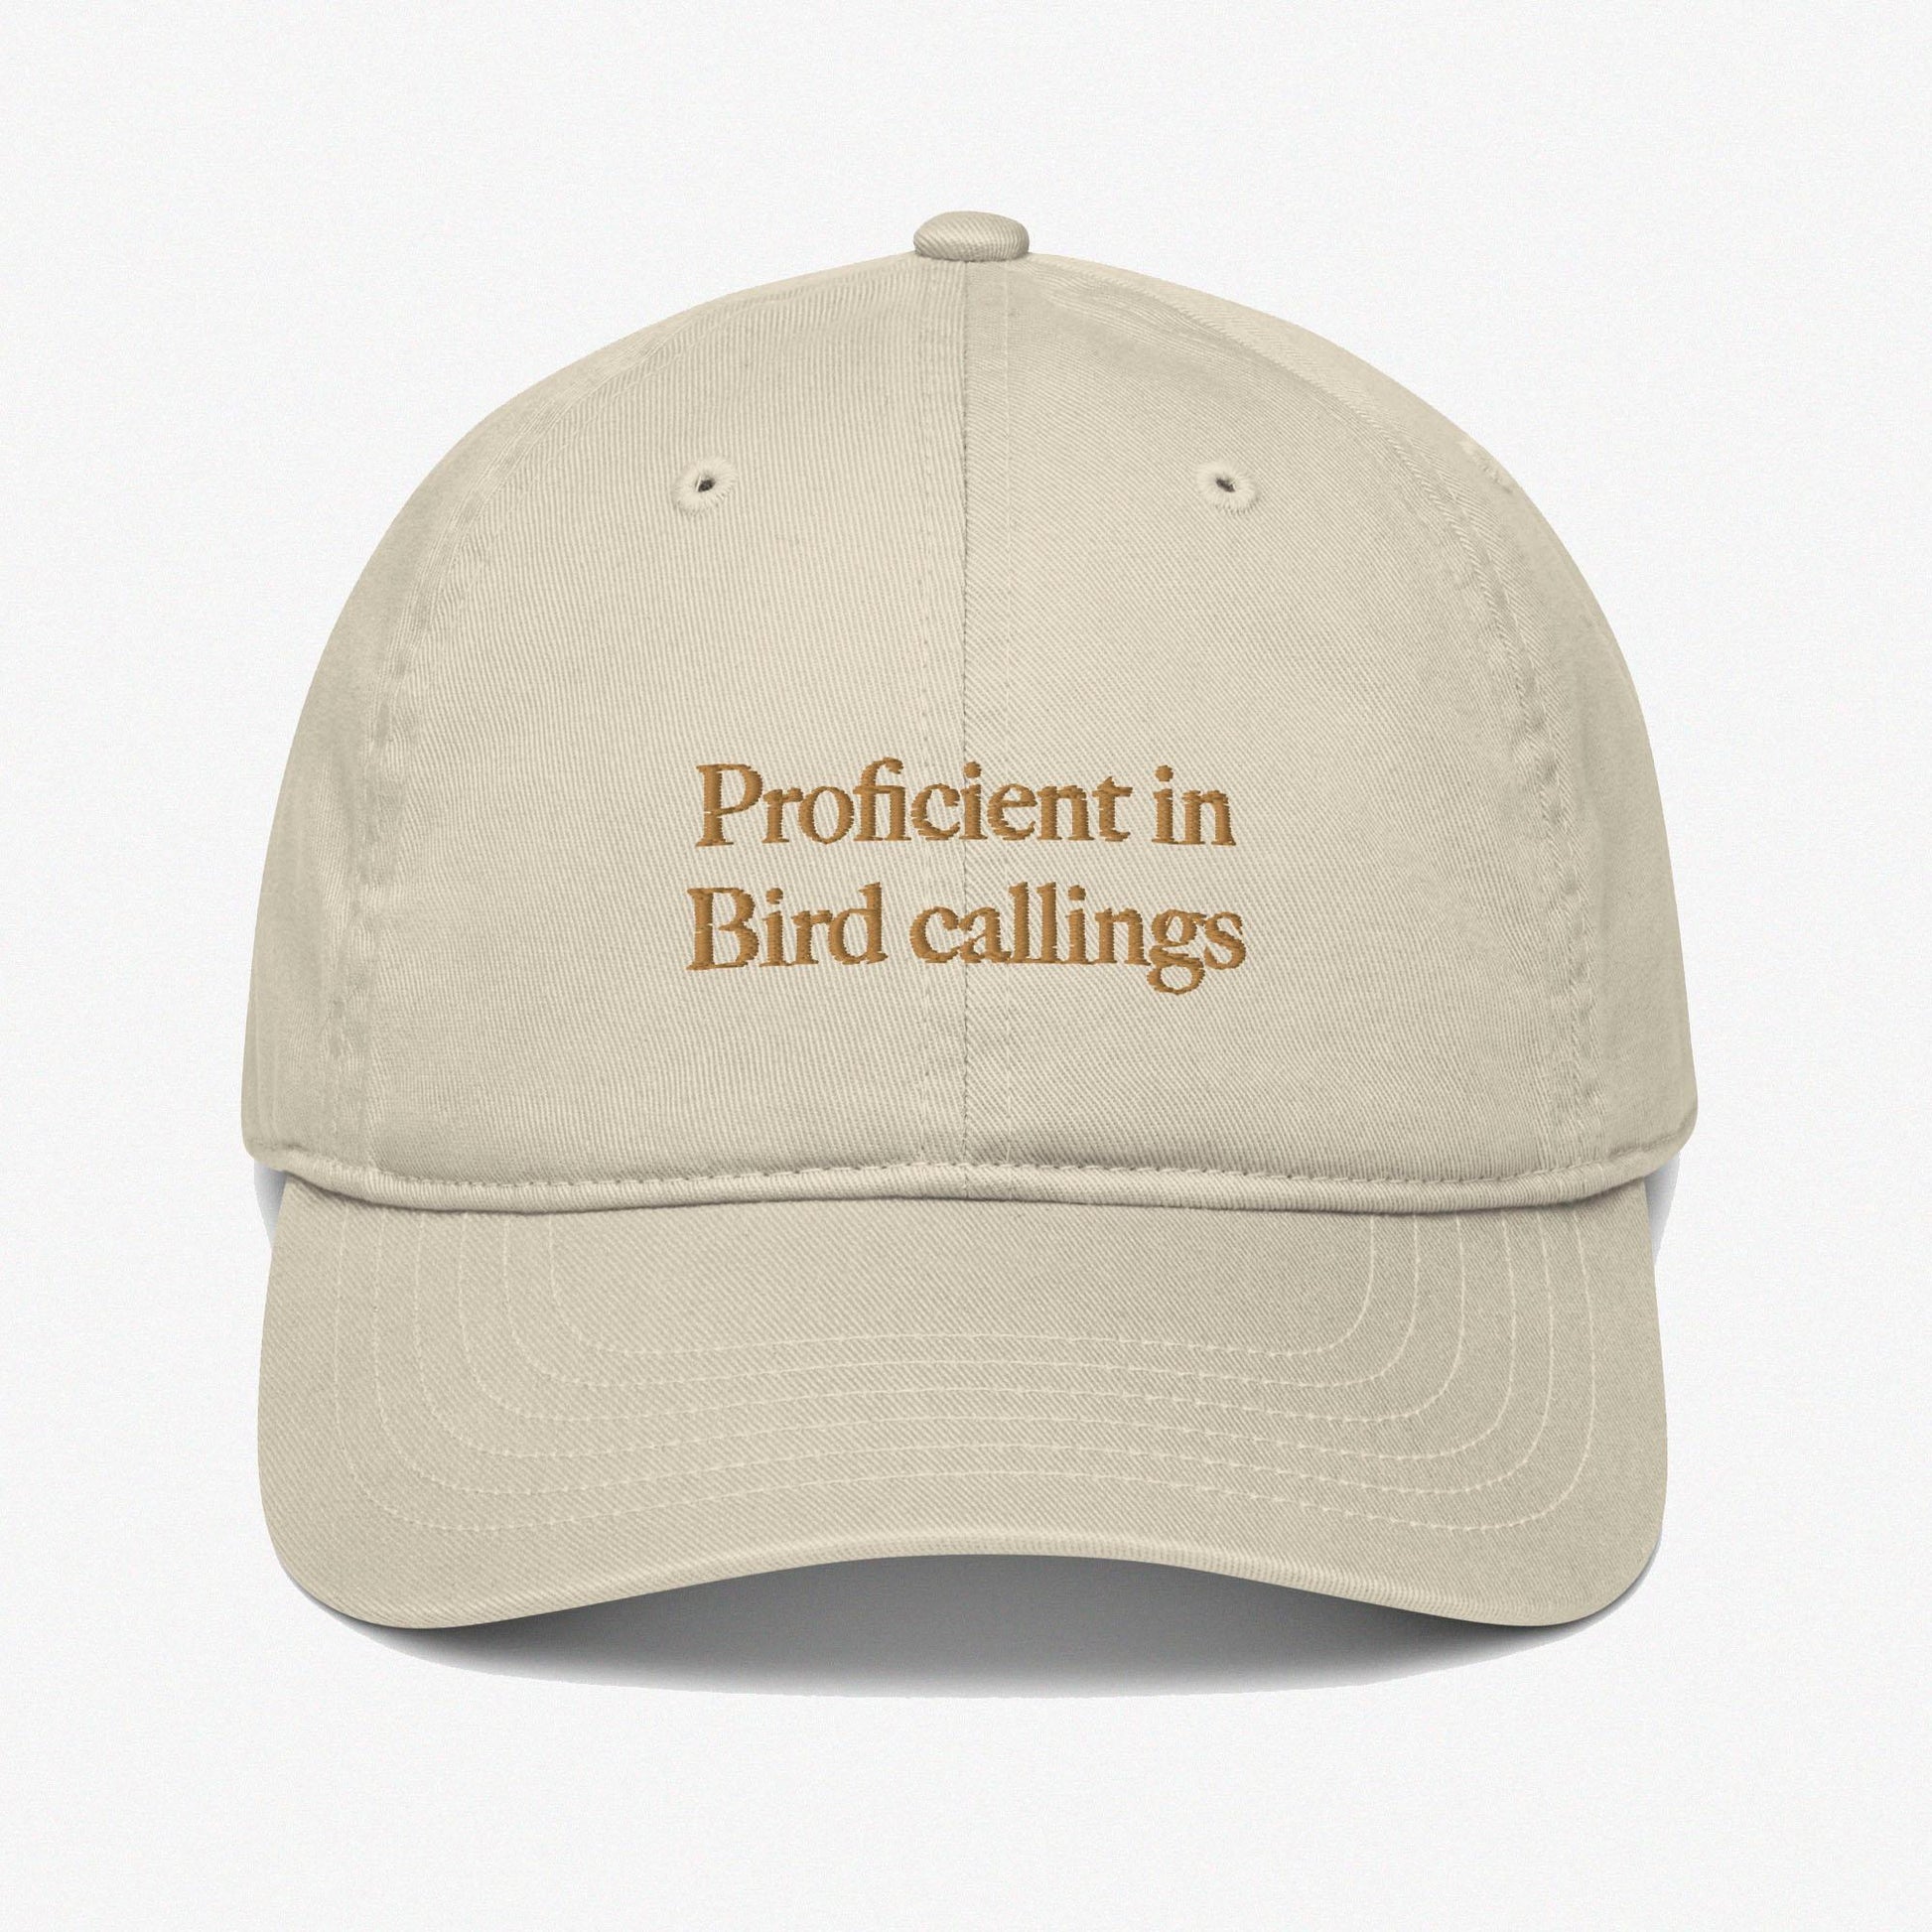 Beige dad hat, embroidered caption: Proficient in bird callings, Low profiles, 6 panels, Organic cotton